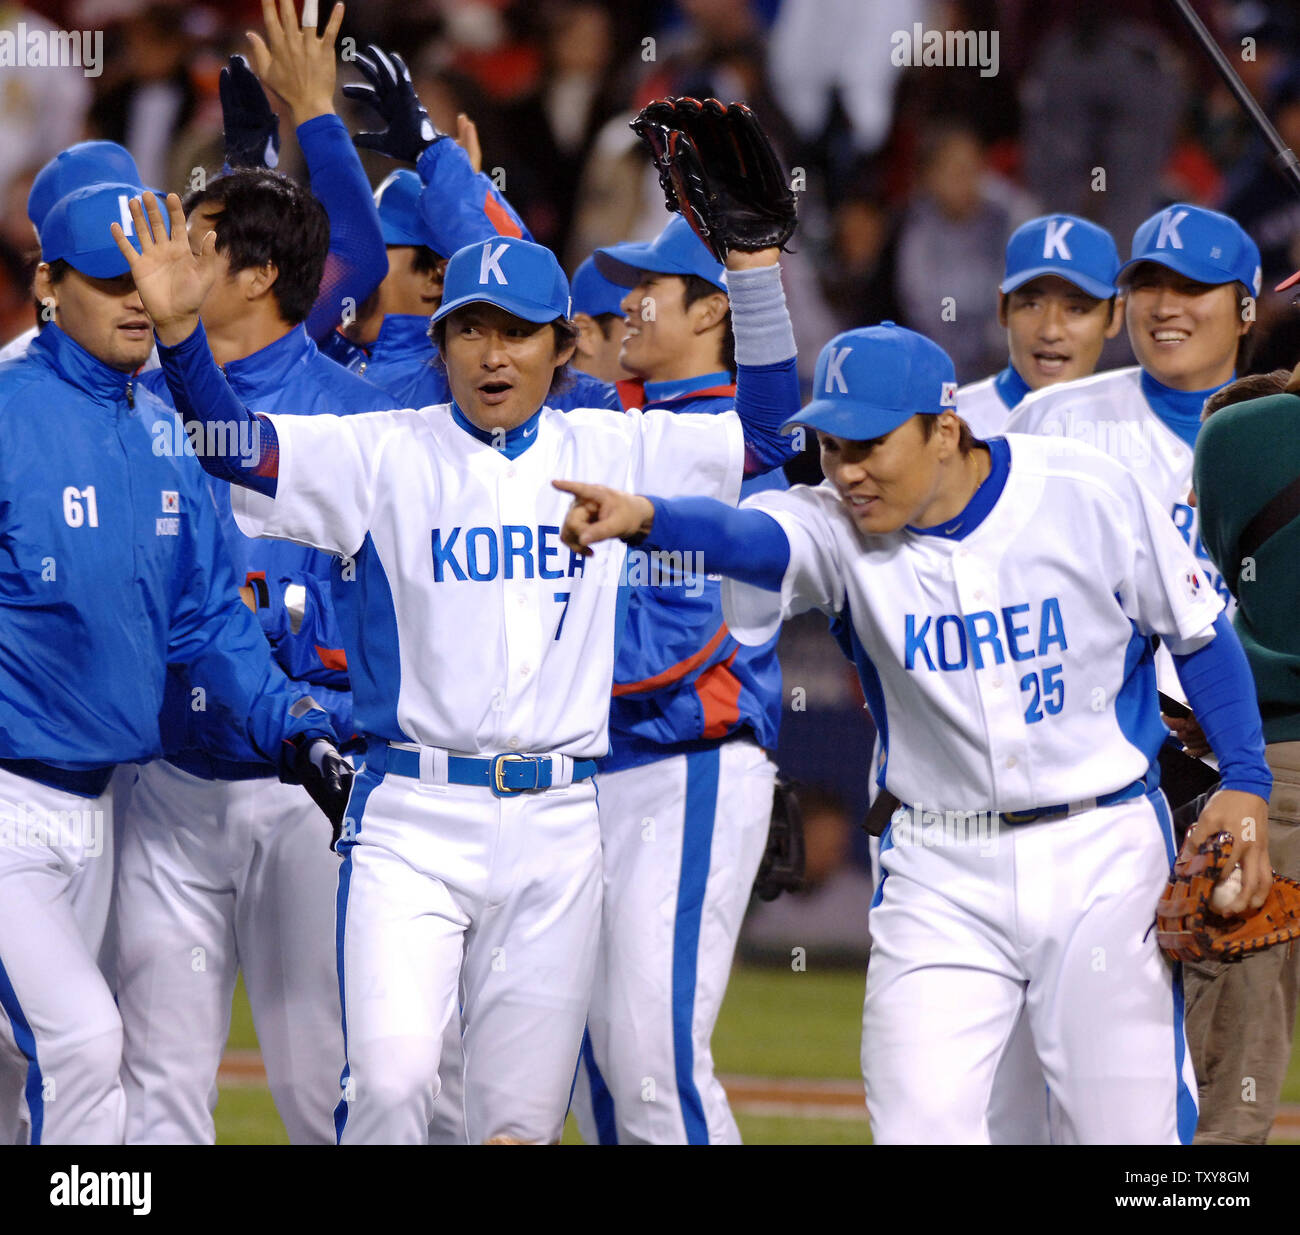 South Korea's Jong Beom Lee (#7) and Seung Youp Lee(#25) celebrate after  their